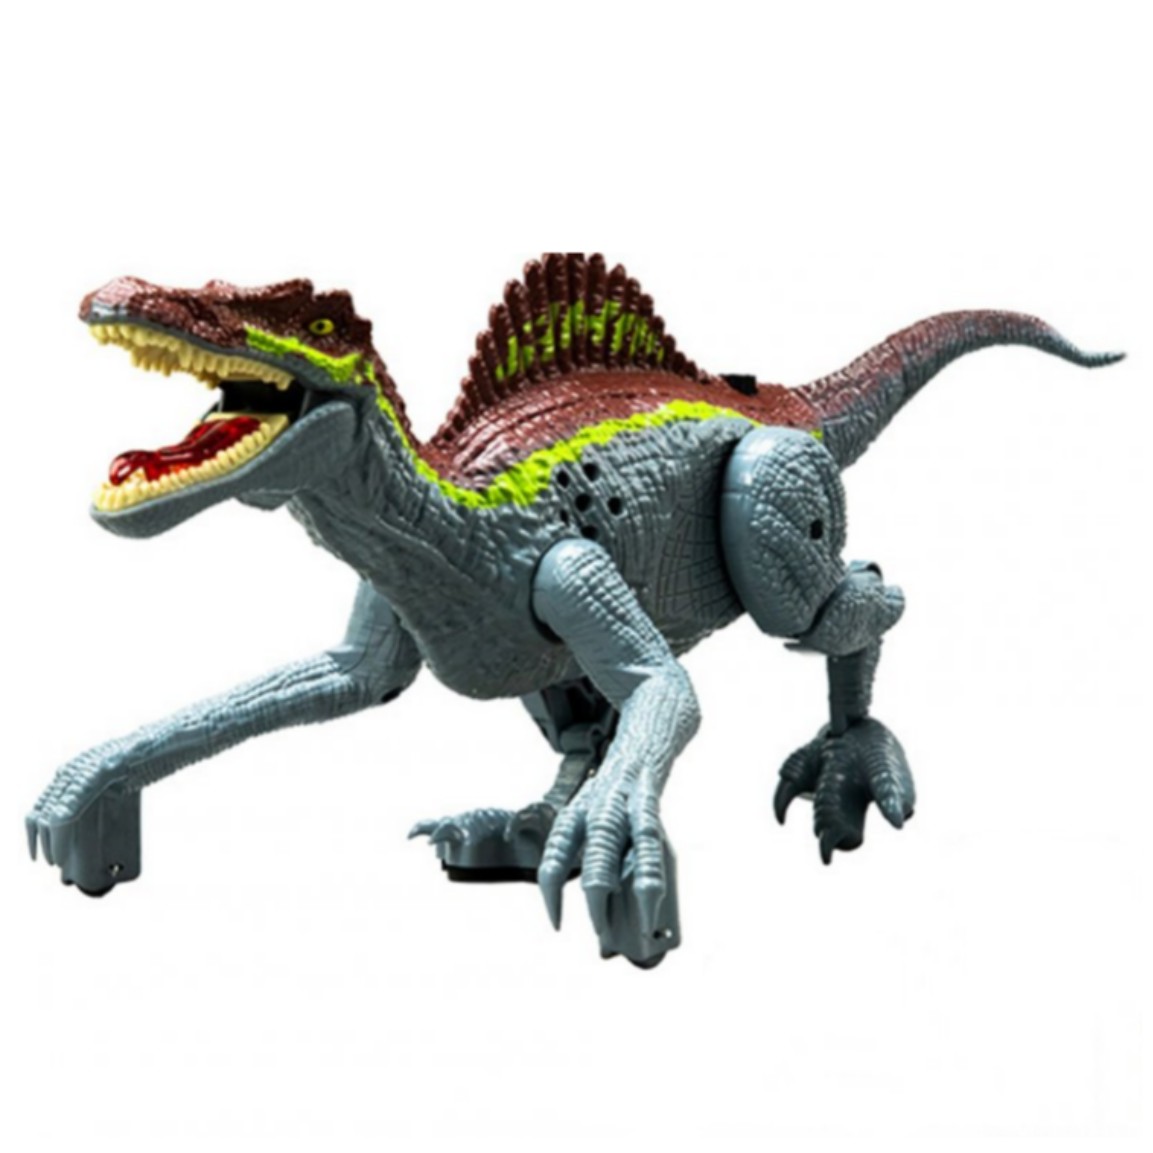 Remote Control Jurassic Dinosaur Toys For Kids 2.4Ghz Gesture Sensing RC Walking Dinosaur Robot Toy With Light Sound Birthday Gifts For Boys Girls